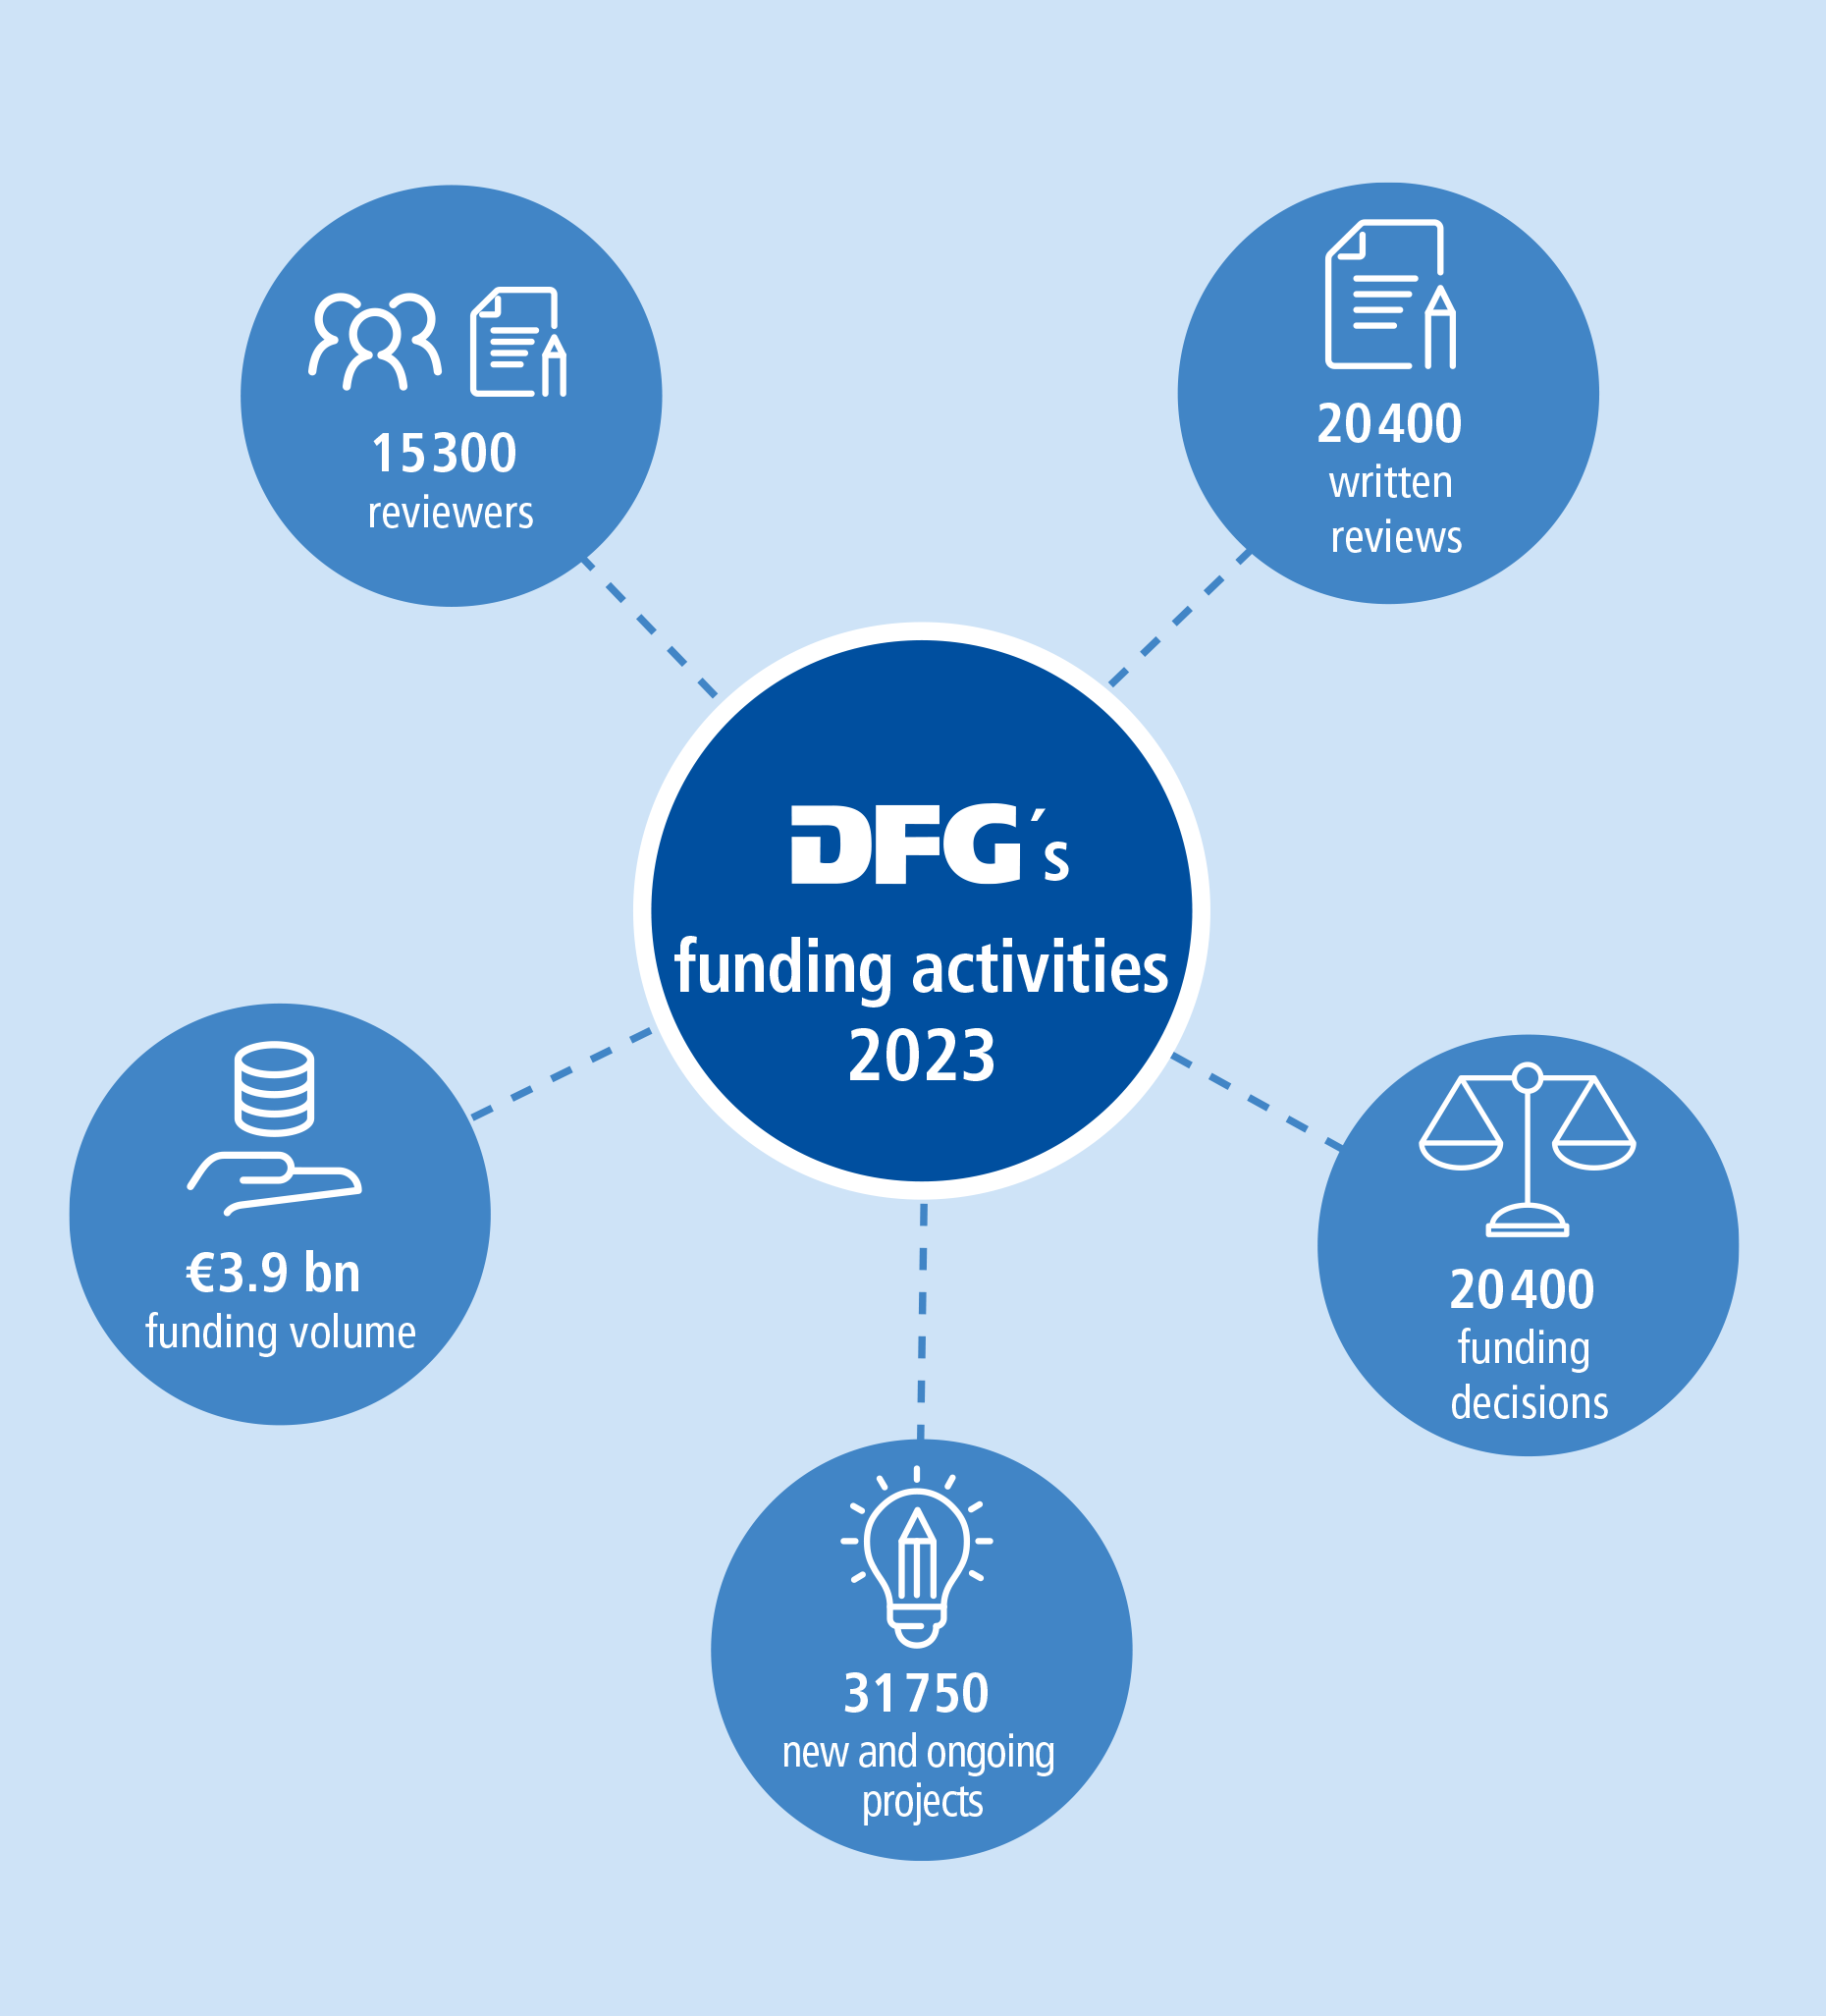 Graphic from the Annual Report 2023: The DFG's funding activities in 2023